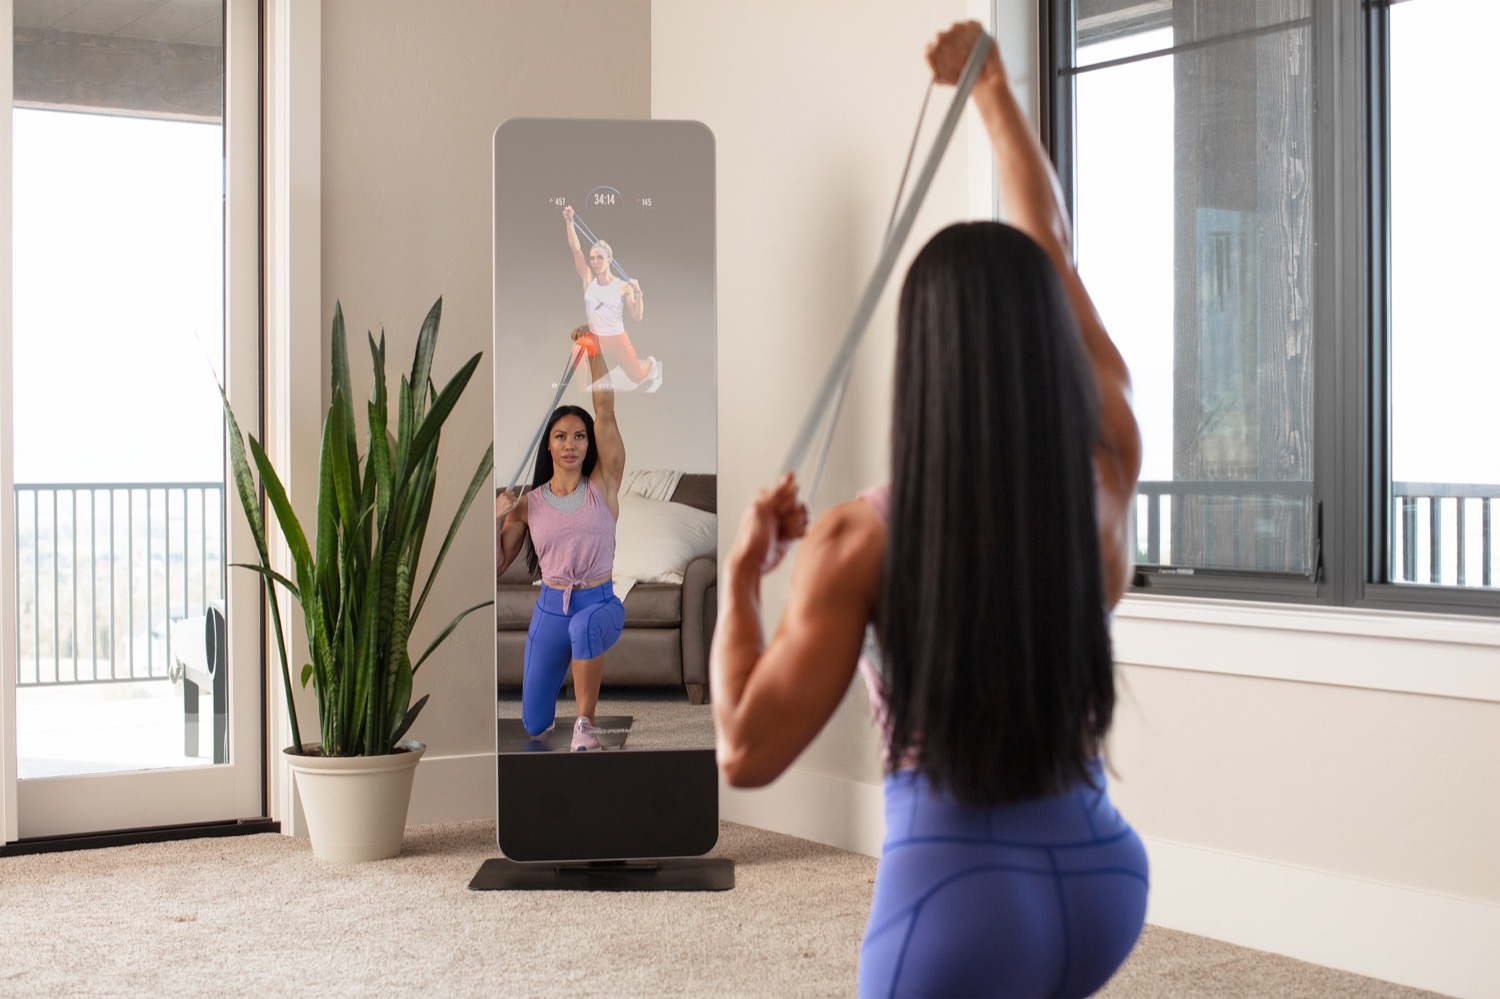 5 Best Smart Fitness Mirrors for Your Home Gym